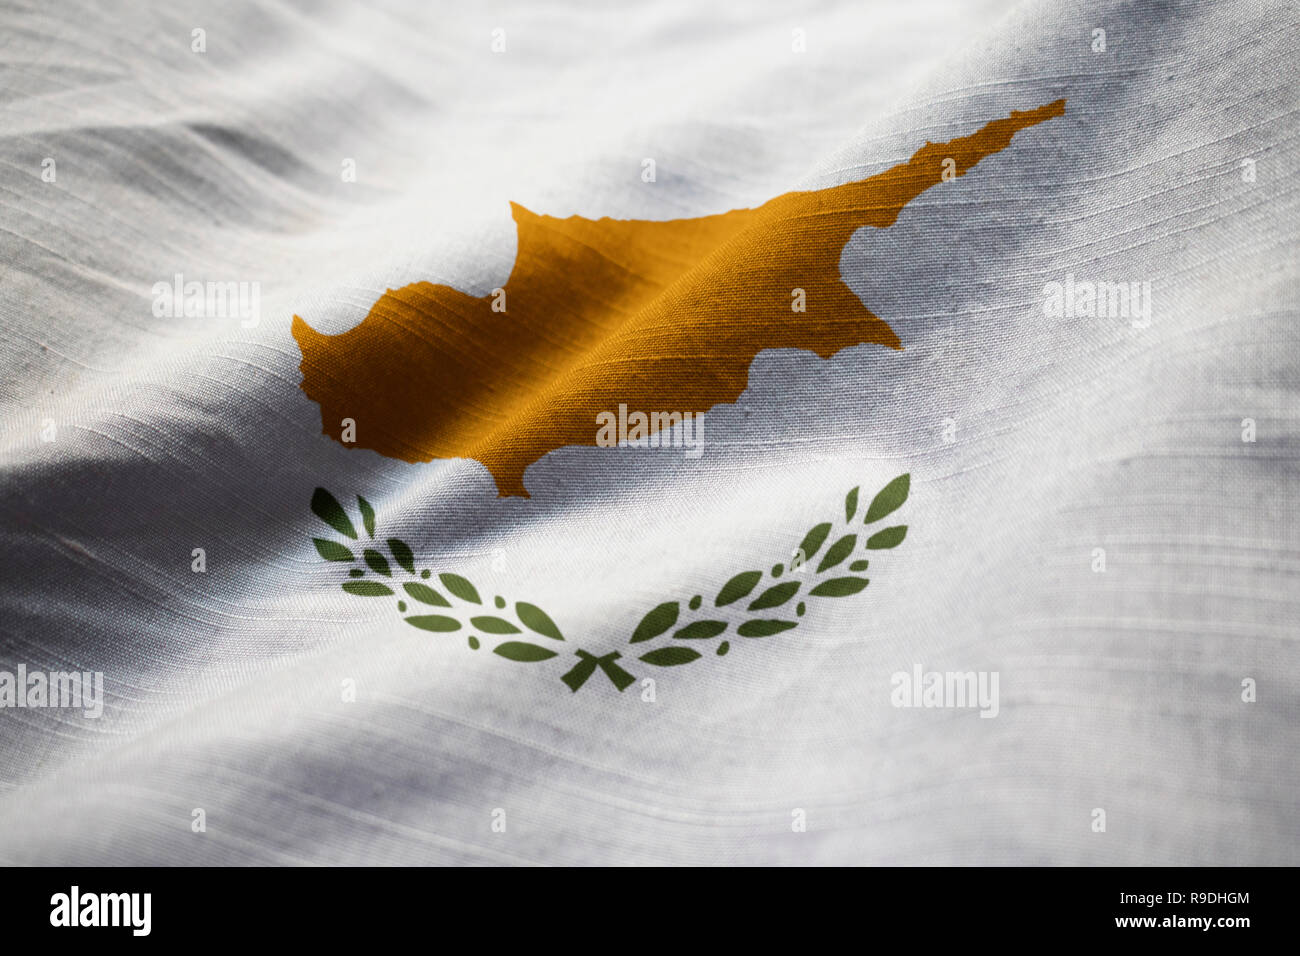 Closeup of Ruffled Cyprus Flag, Cyprus Flag Blowing in Wind Stock Photo